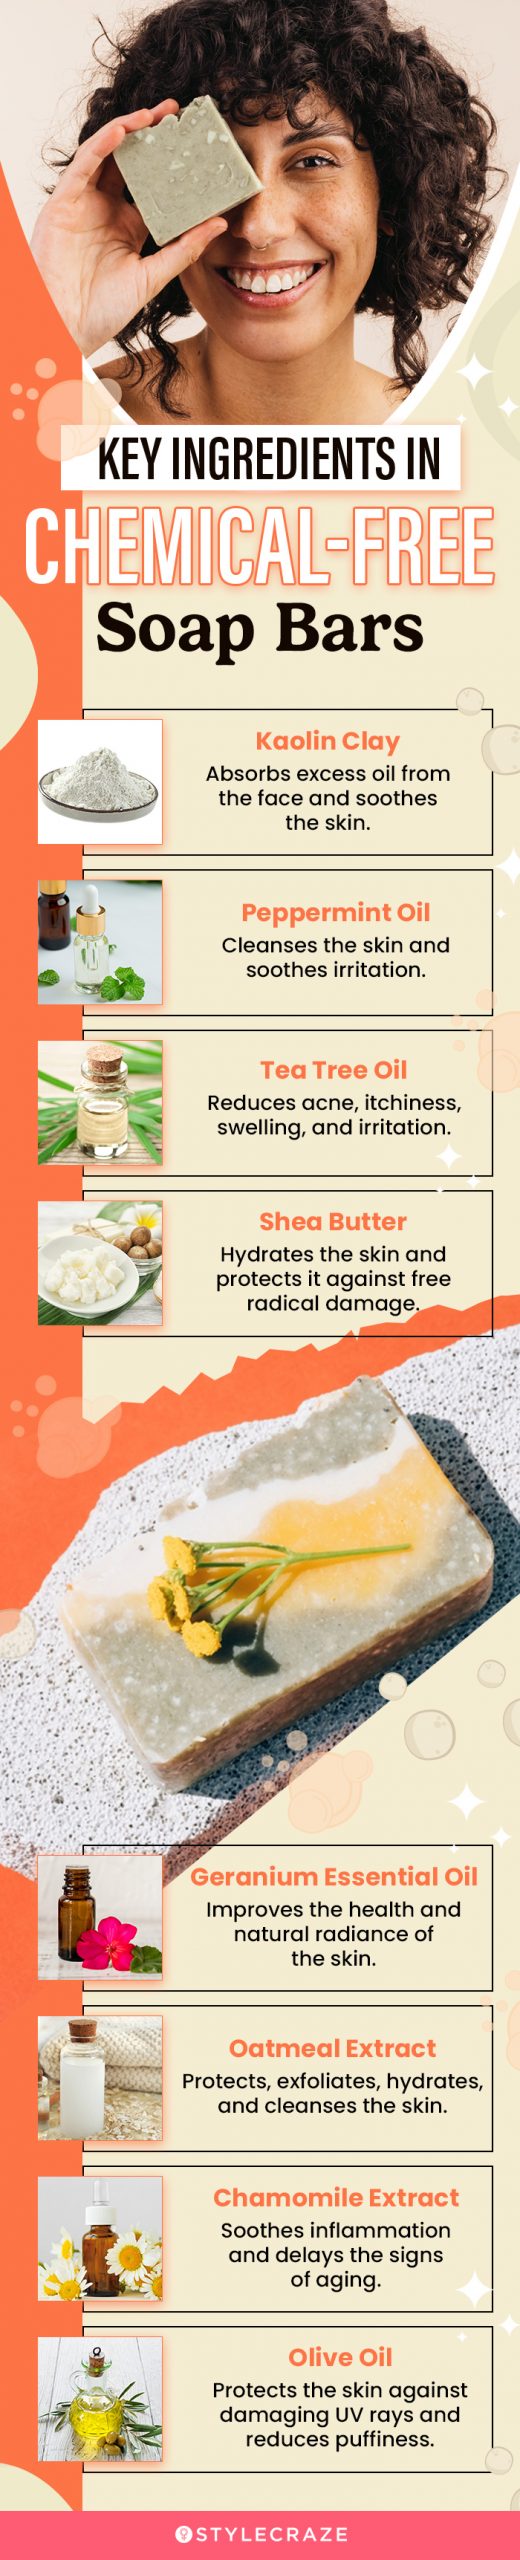 Key Ingredients In Chemical-Free Soap Bars (infographic)